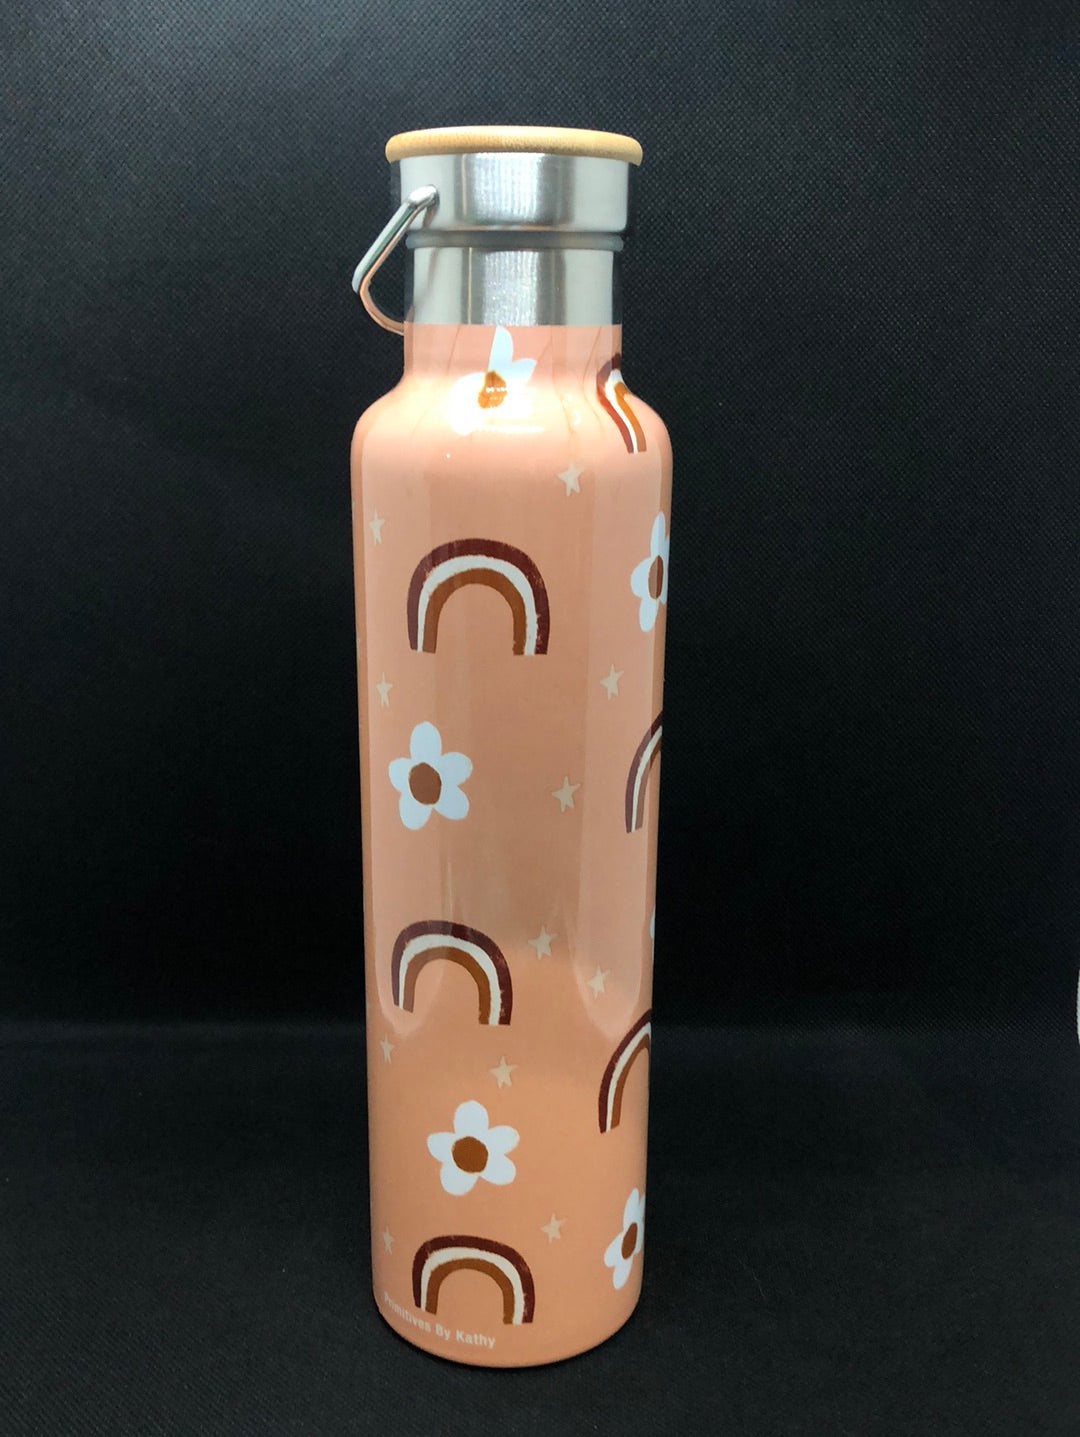 water bottle made of stainless steel and insulated - rainbows and wooden lid